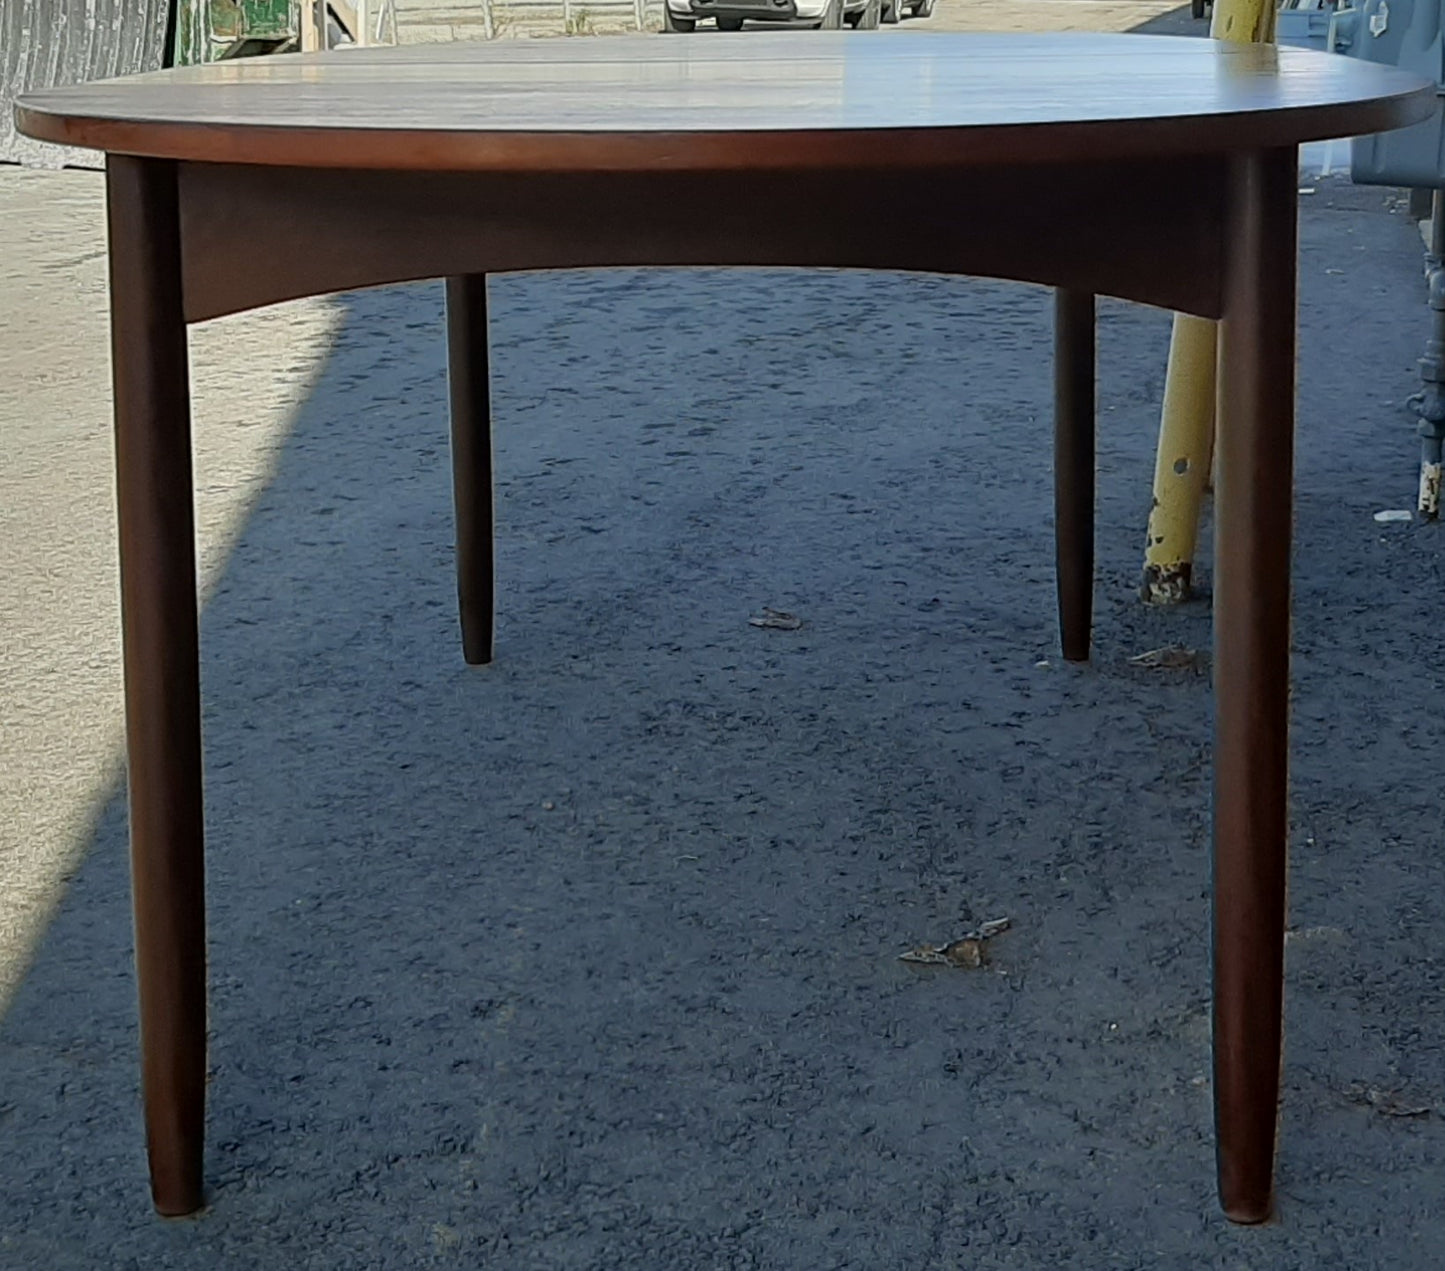 REFINISHED MCM Teak Table Oval w 1 Leaf 60.5"-76.5", PERFECT